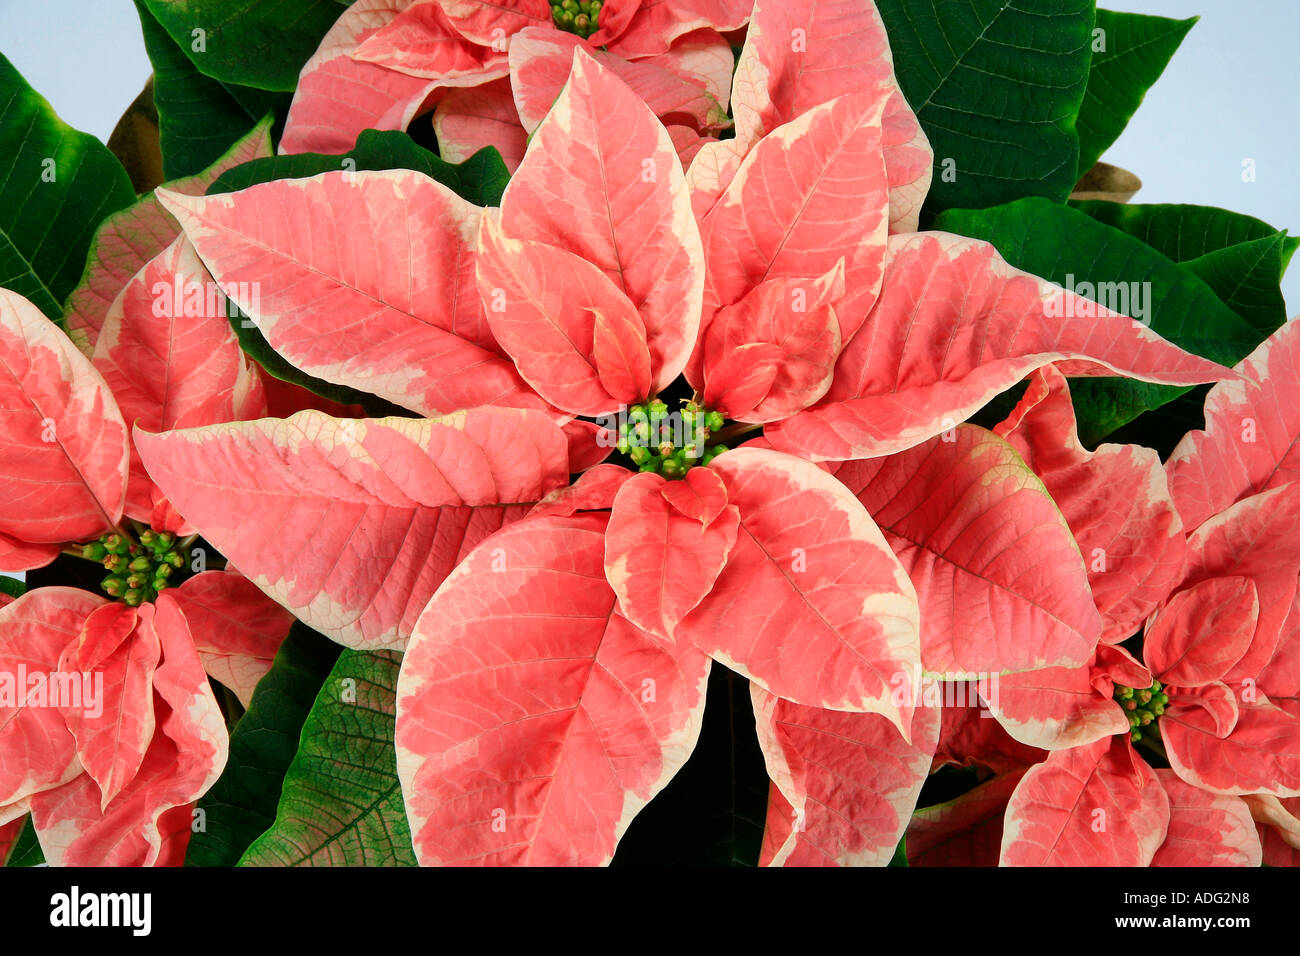 Stella Di Natale Wikipedia.Natale High Resolution Stock Photography And Images Alamy